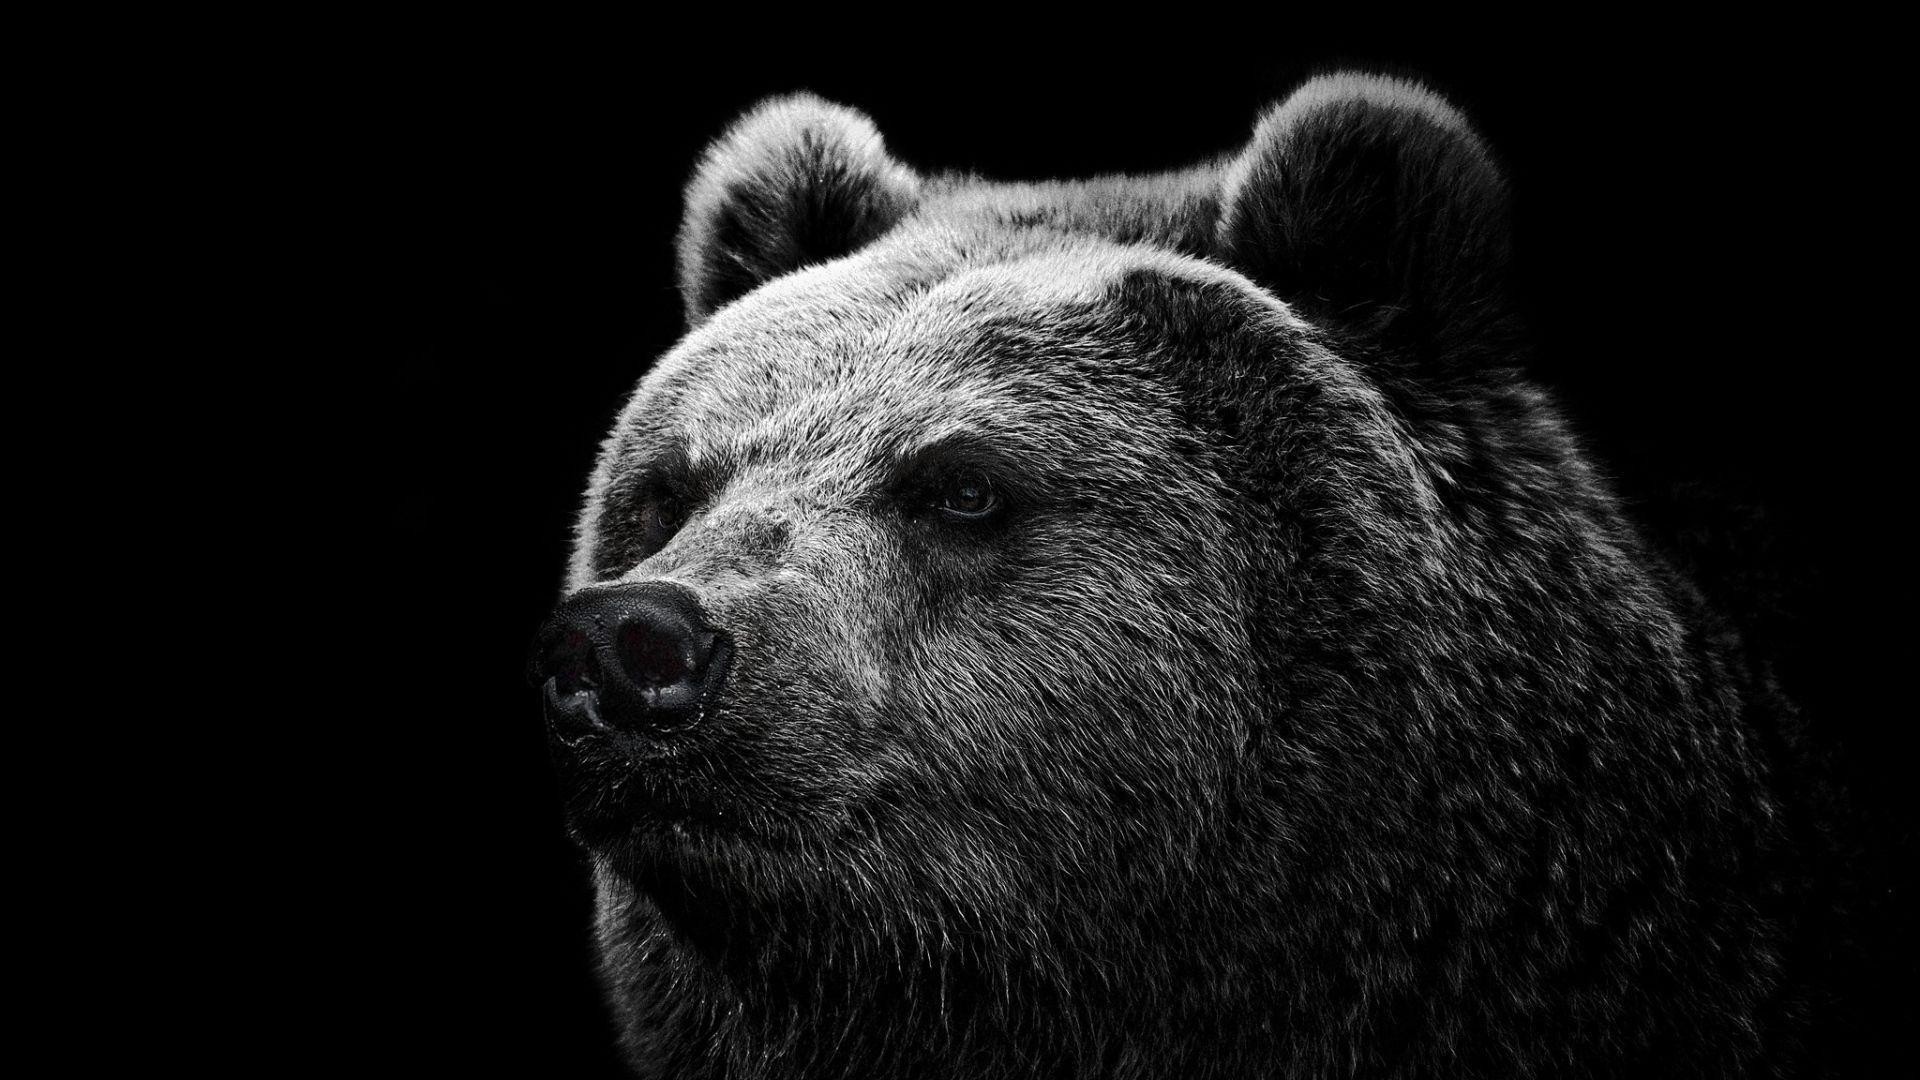 1920x1080 Hd Wallpapers Grizzly Bear Wallpaper Wild Big Grizzly 1280 X 960 .